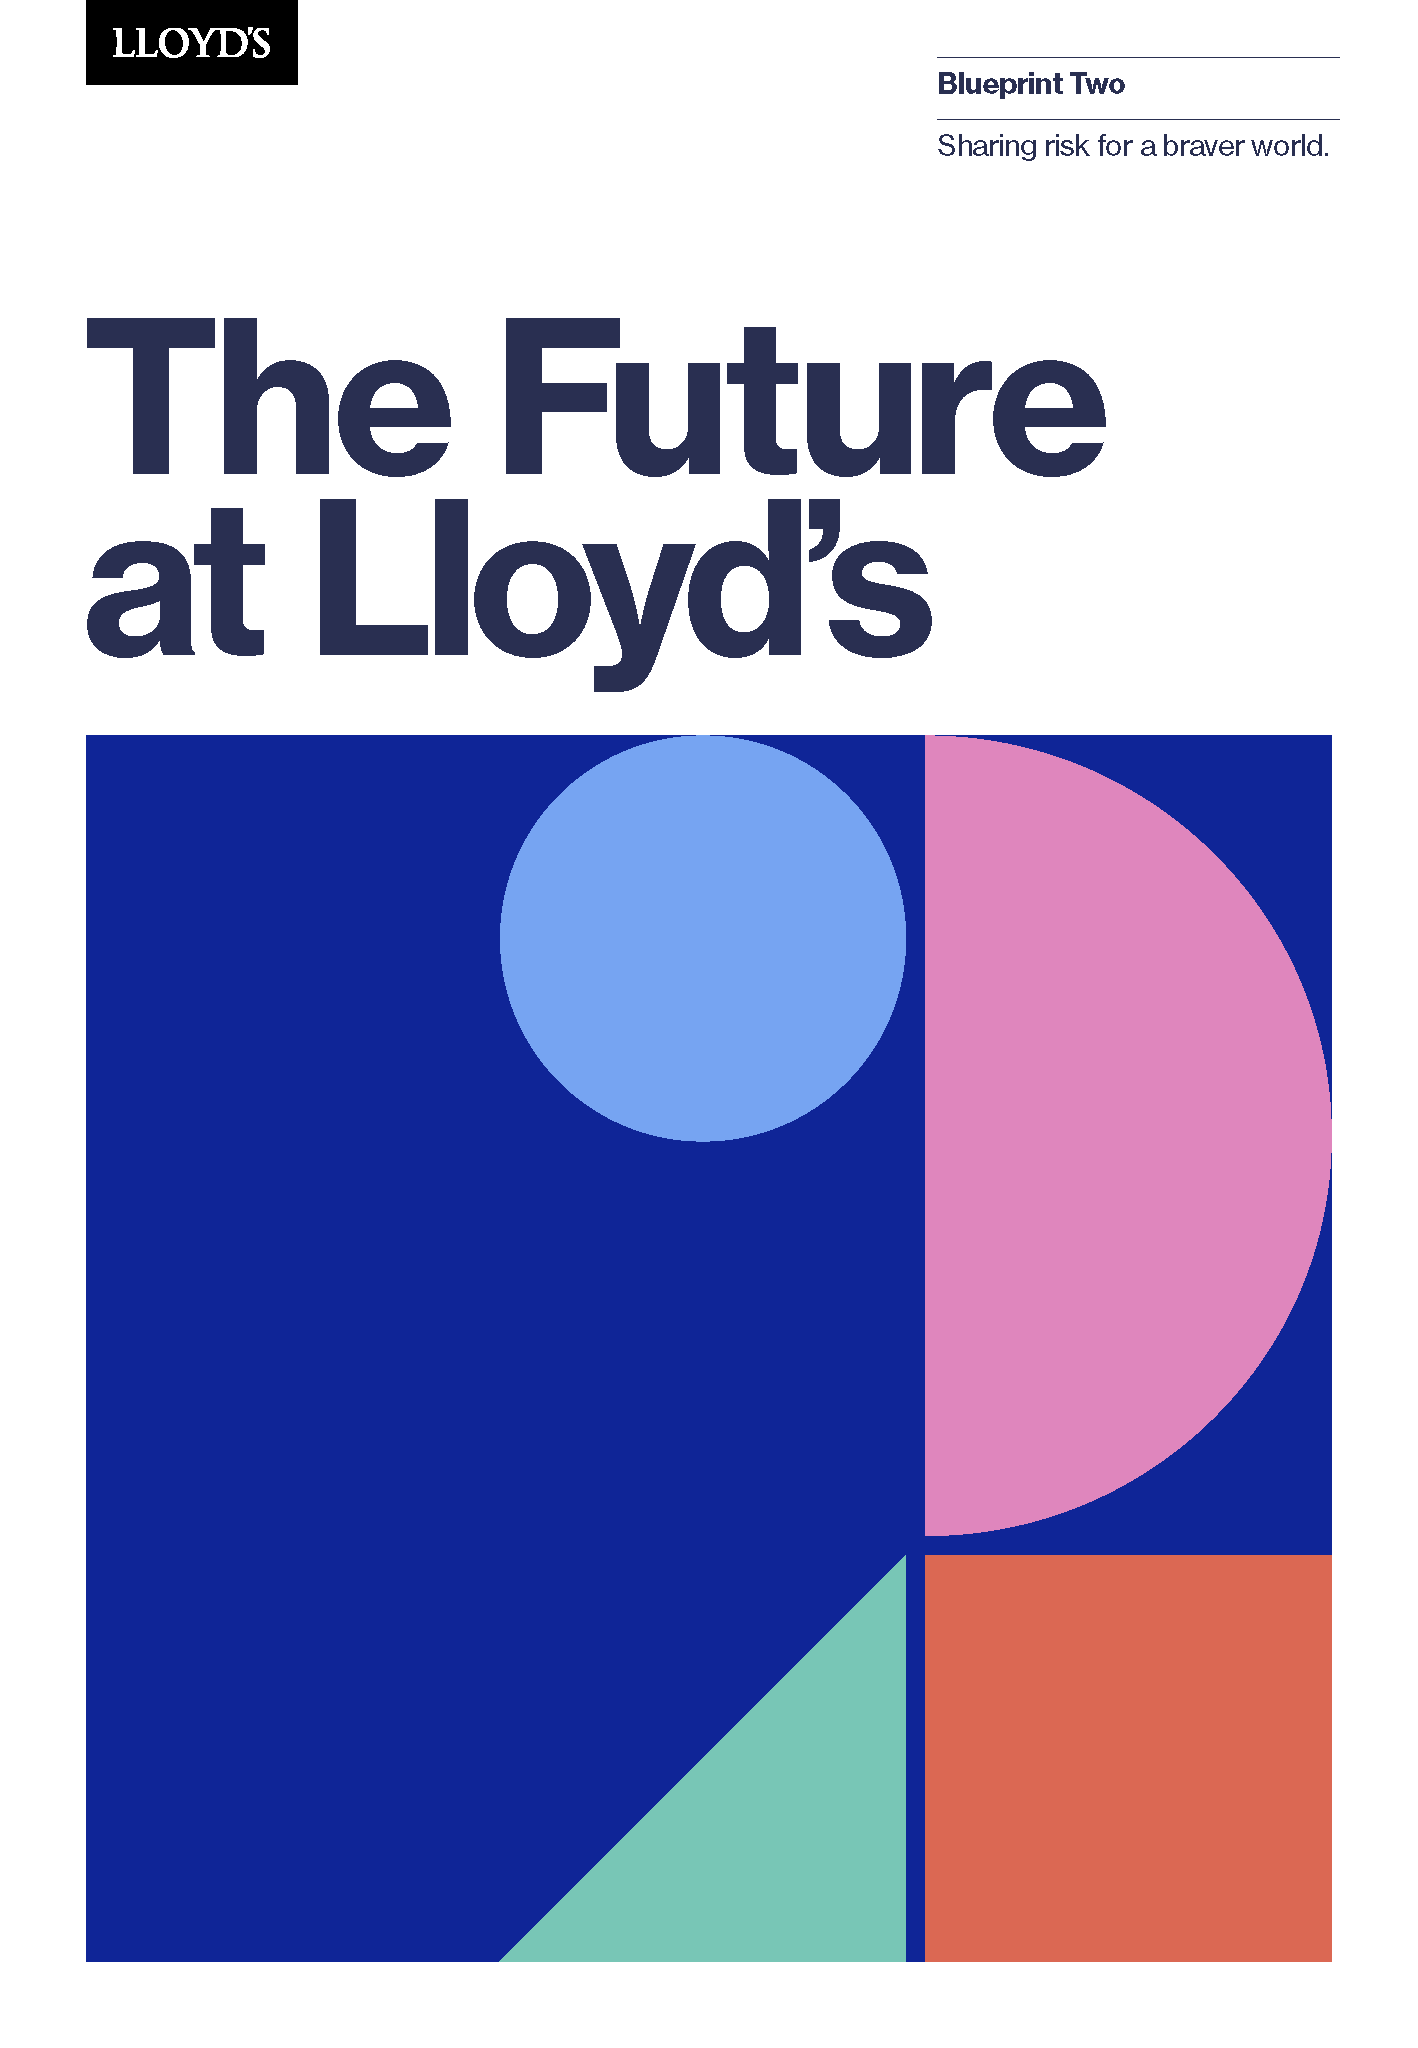 Front cover of a document reading 'the future at Lloyd's' with the Blueprint two Logo